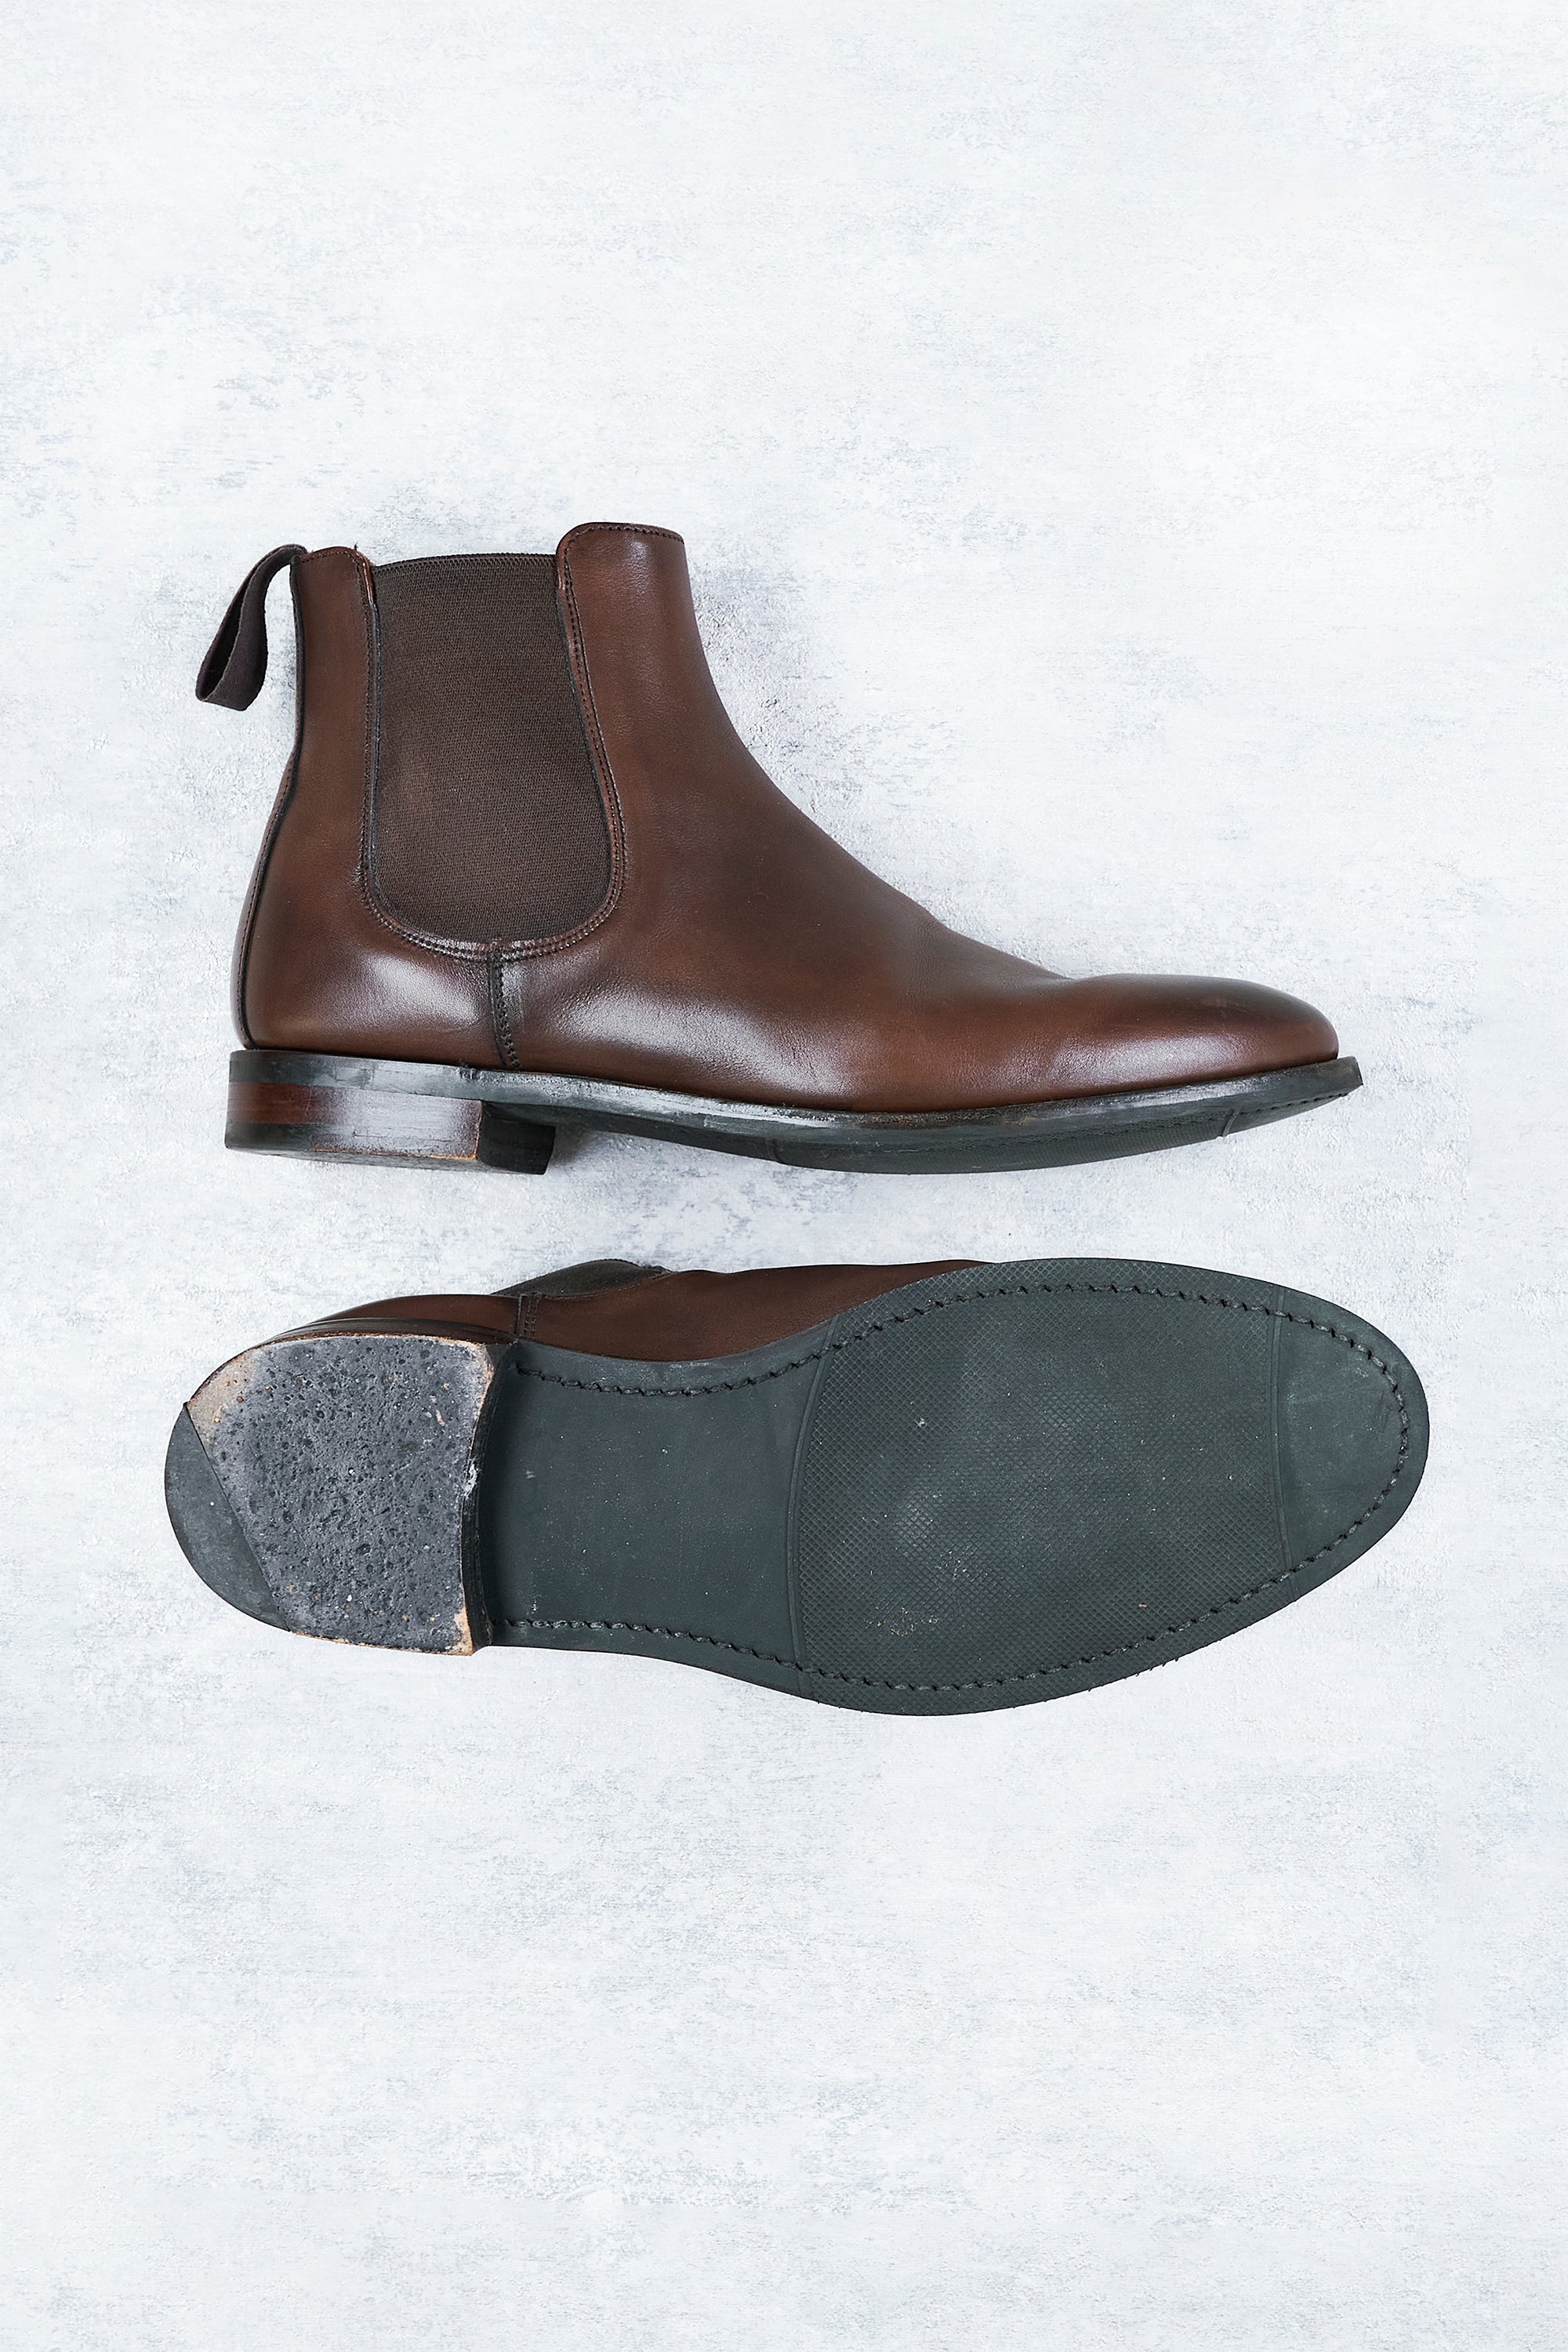 The Armoury Ryoma Brown Calf Chelsea Boots